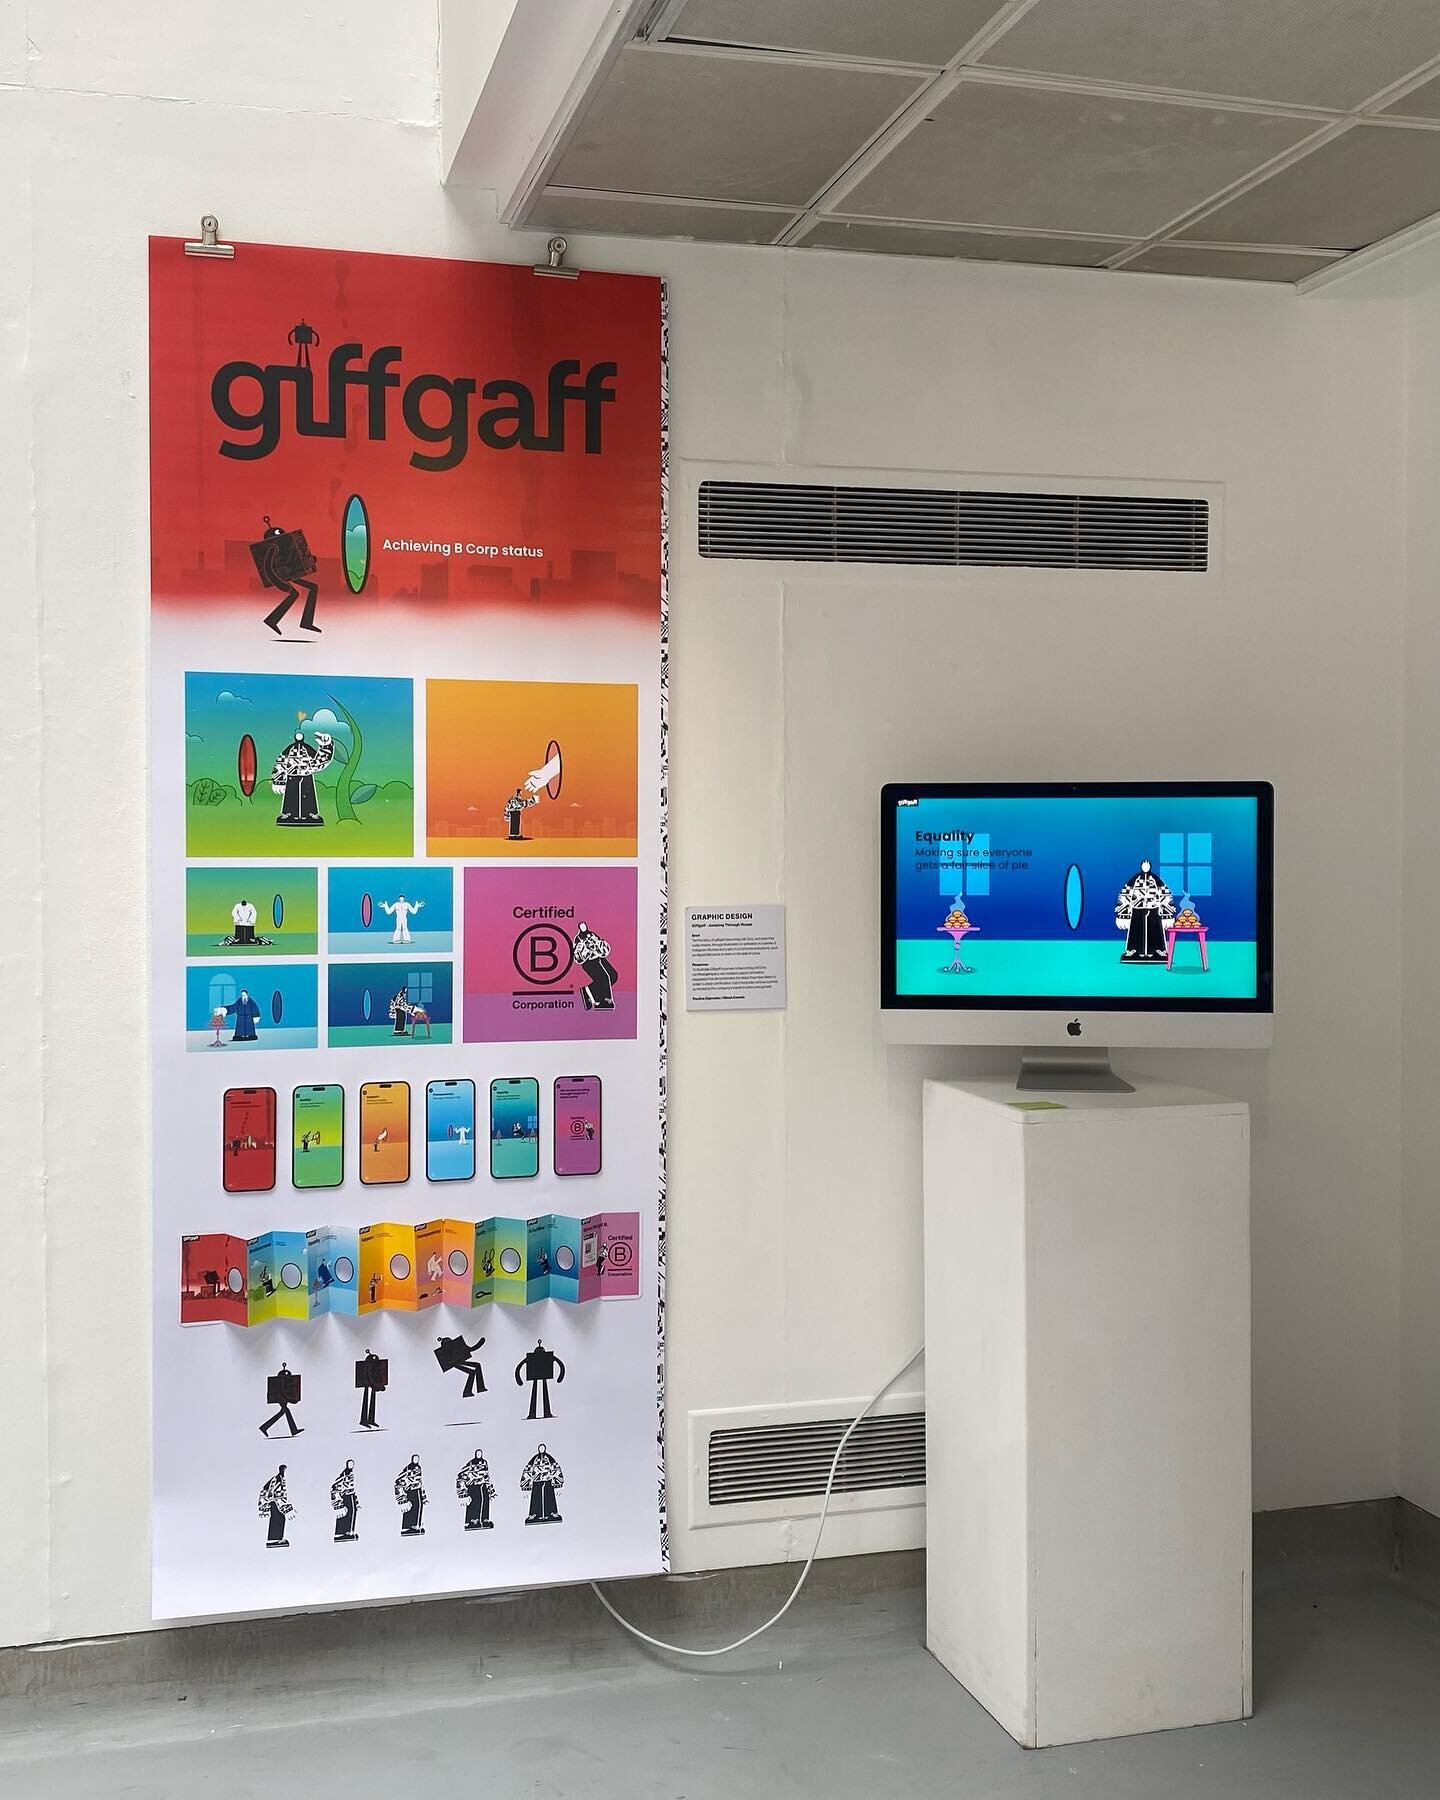 Giffgaff Jumping through Hoops by Nilesh and Paulina.

Private View on June 8th, 5-9 P.m.